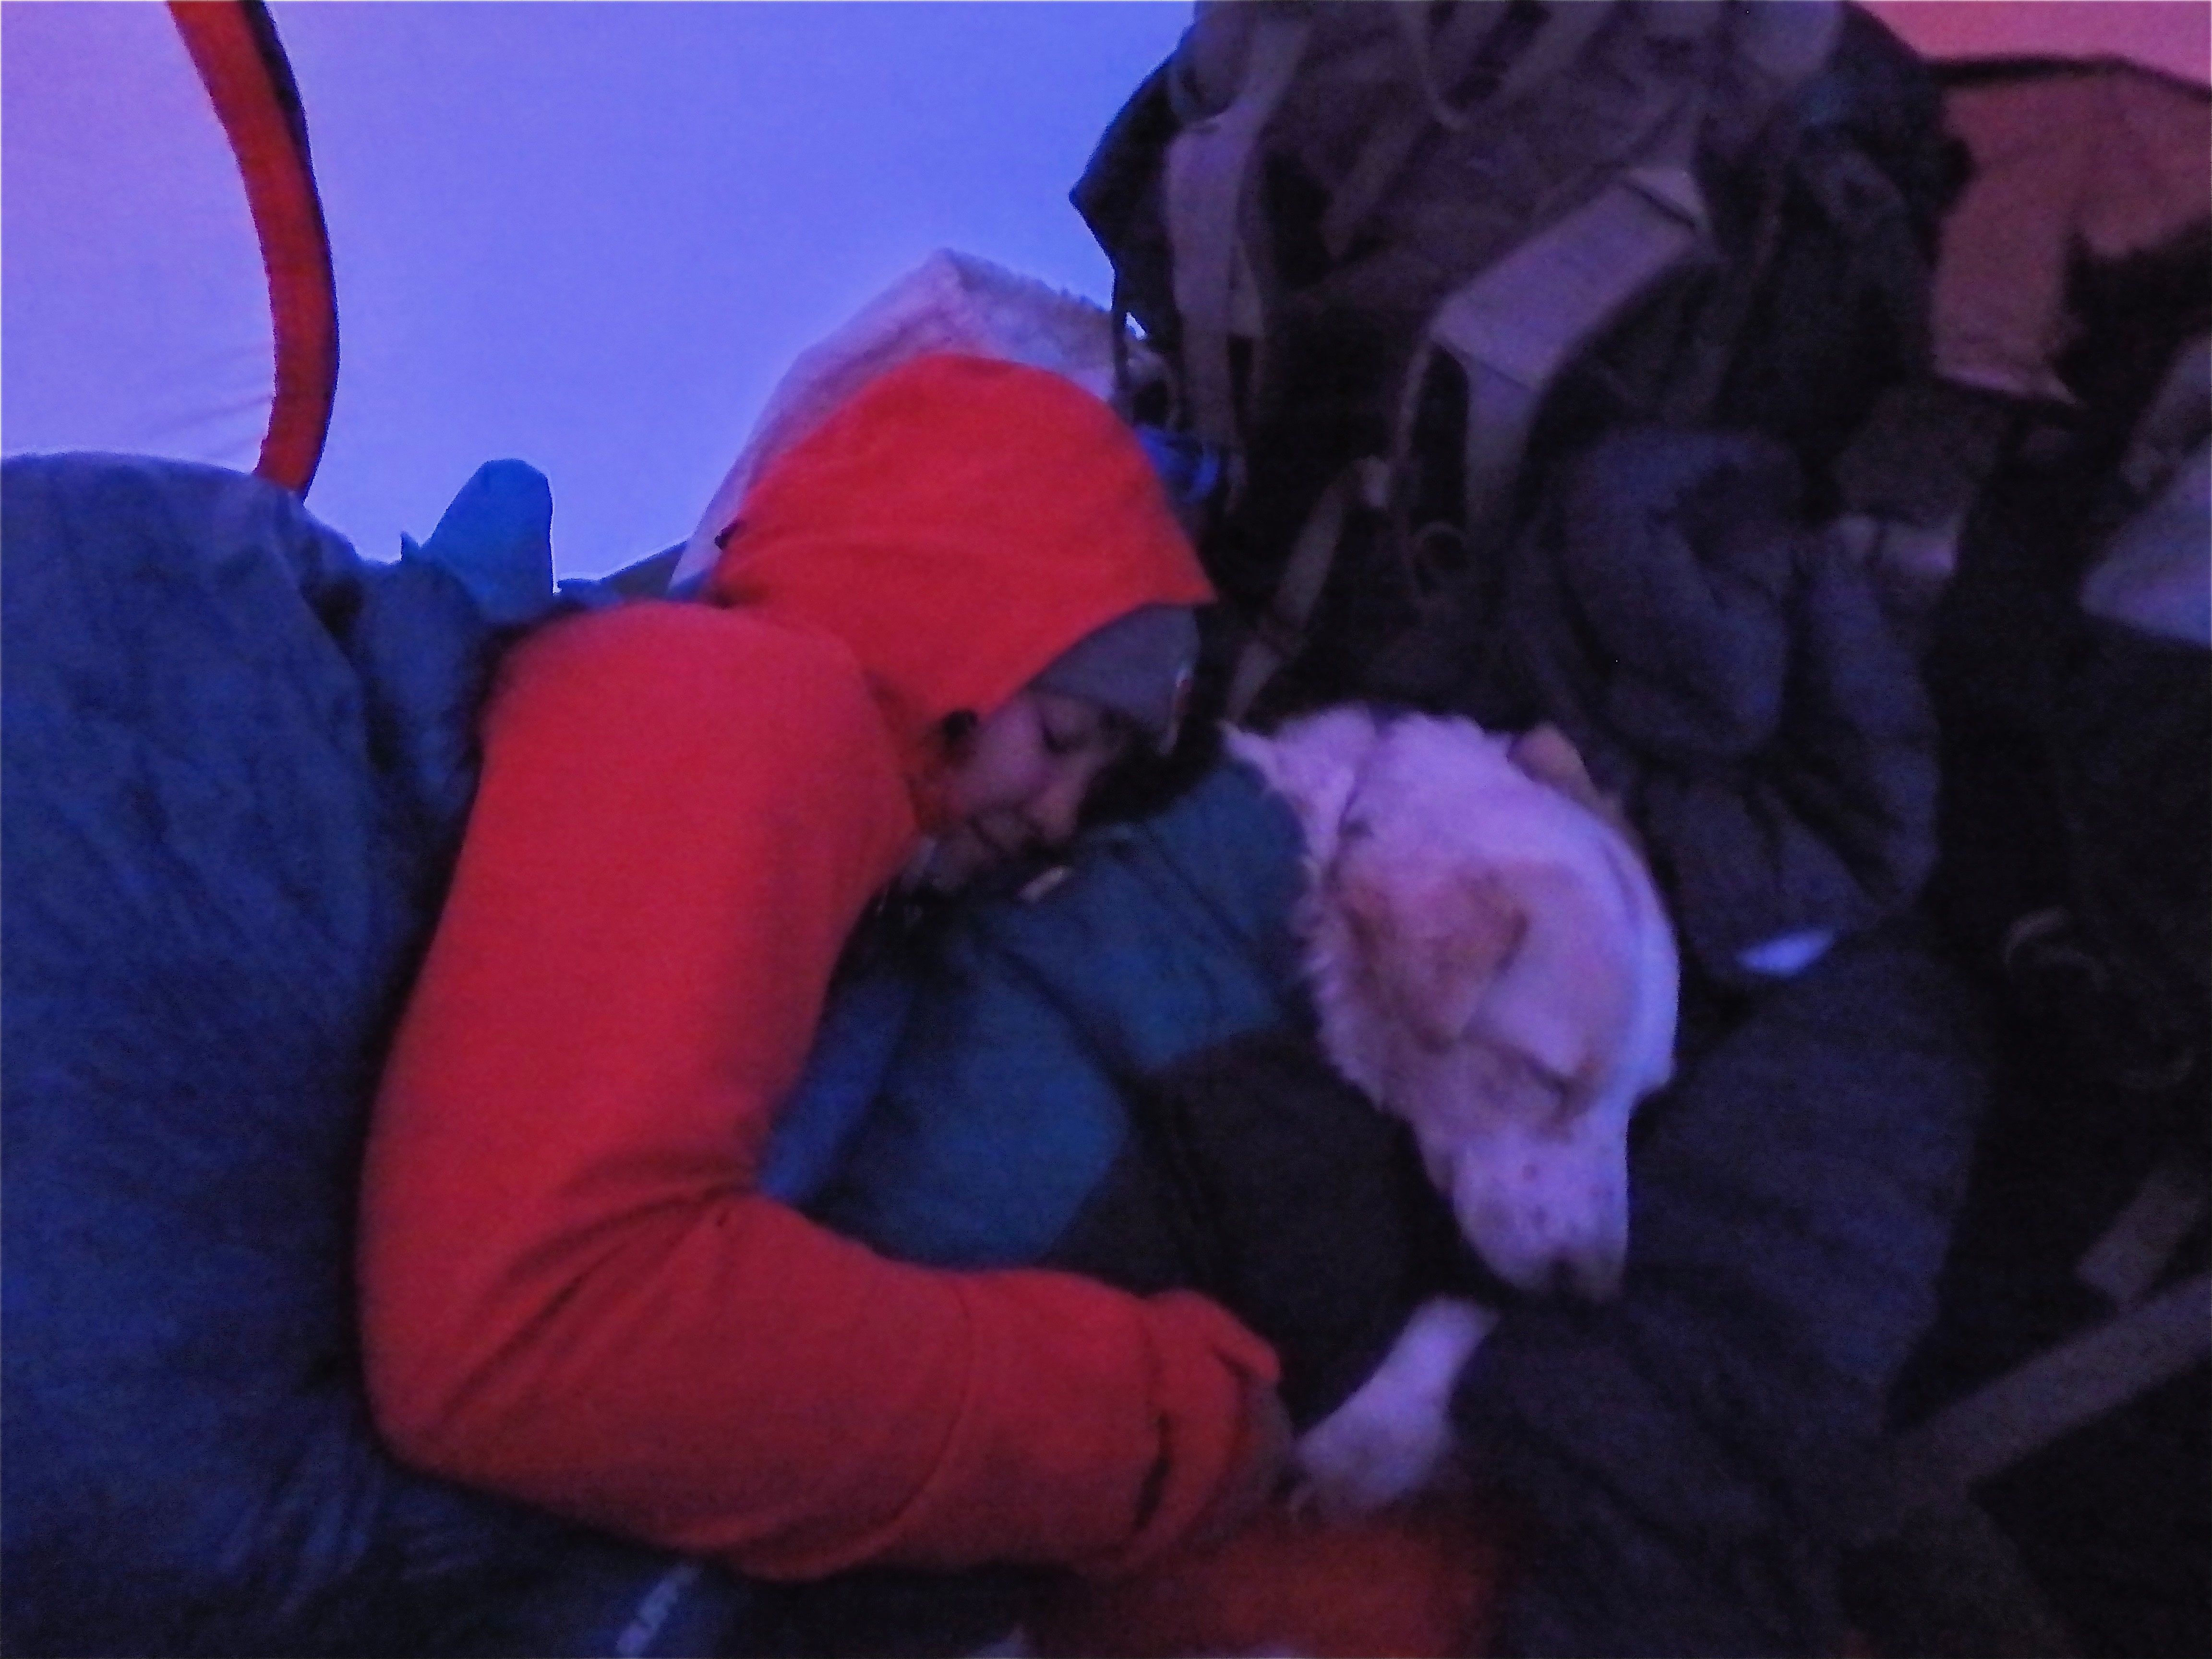 In a tent, a woman cuddles up next to her dog who is wearing a Ruffwear Powder Hound™ Jacket.